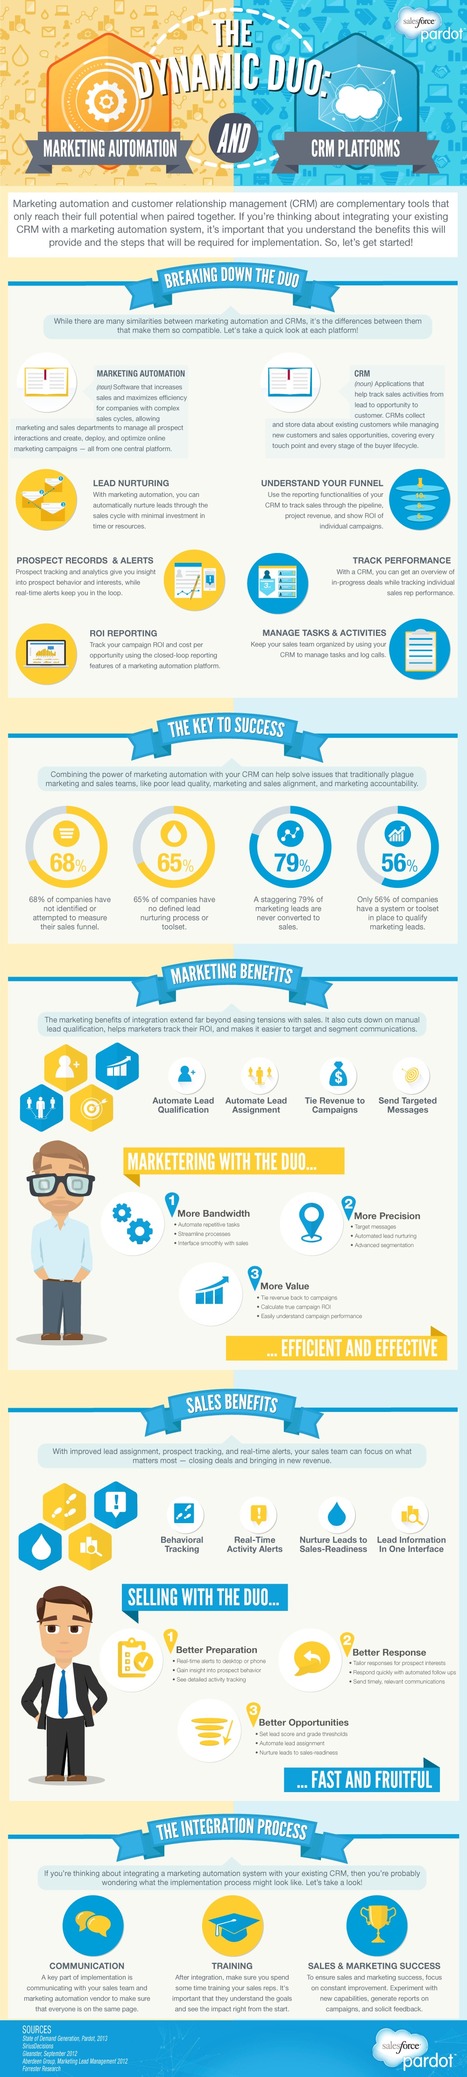 Marketing Automation & Your CRM #infographic - Pardot | #TheMarketingAutomationAlert | The MarTech Digest | Scoop.it